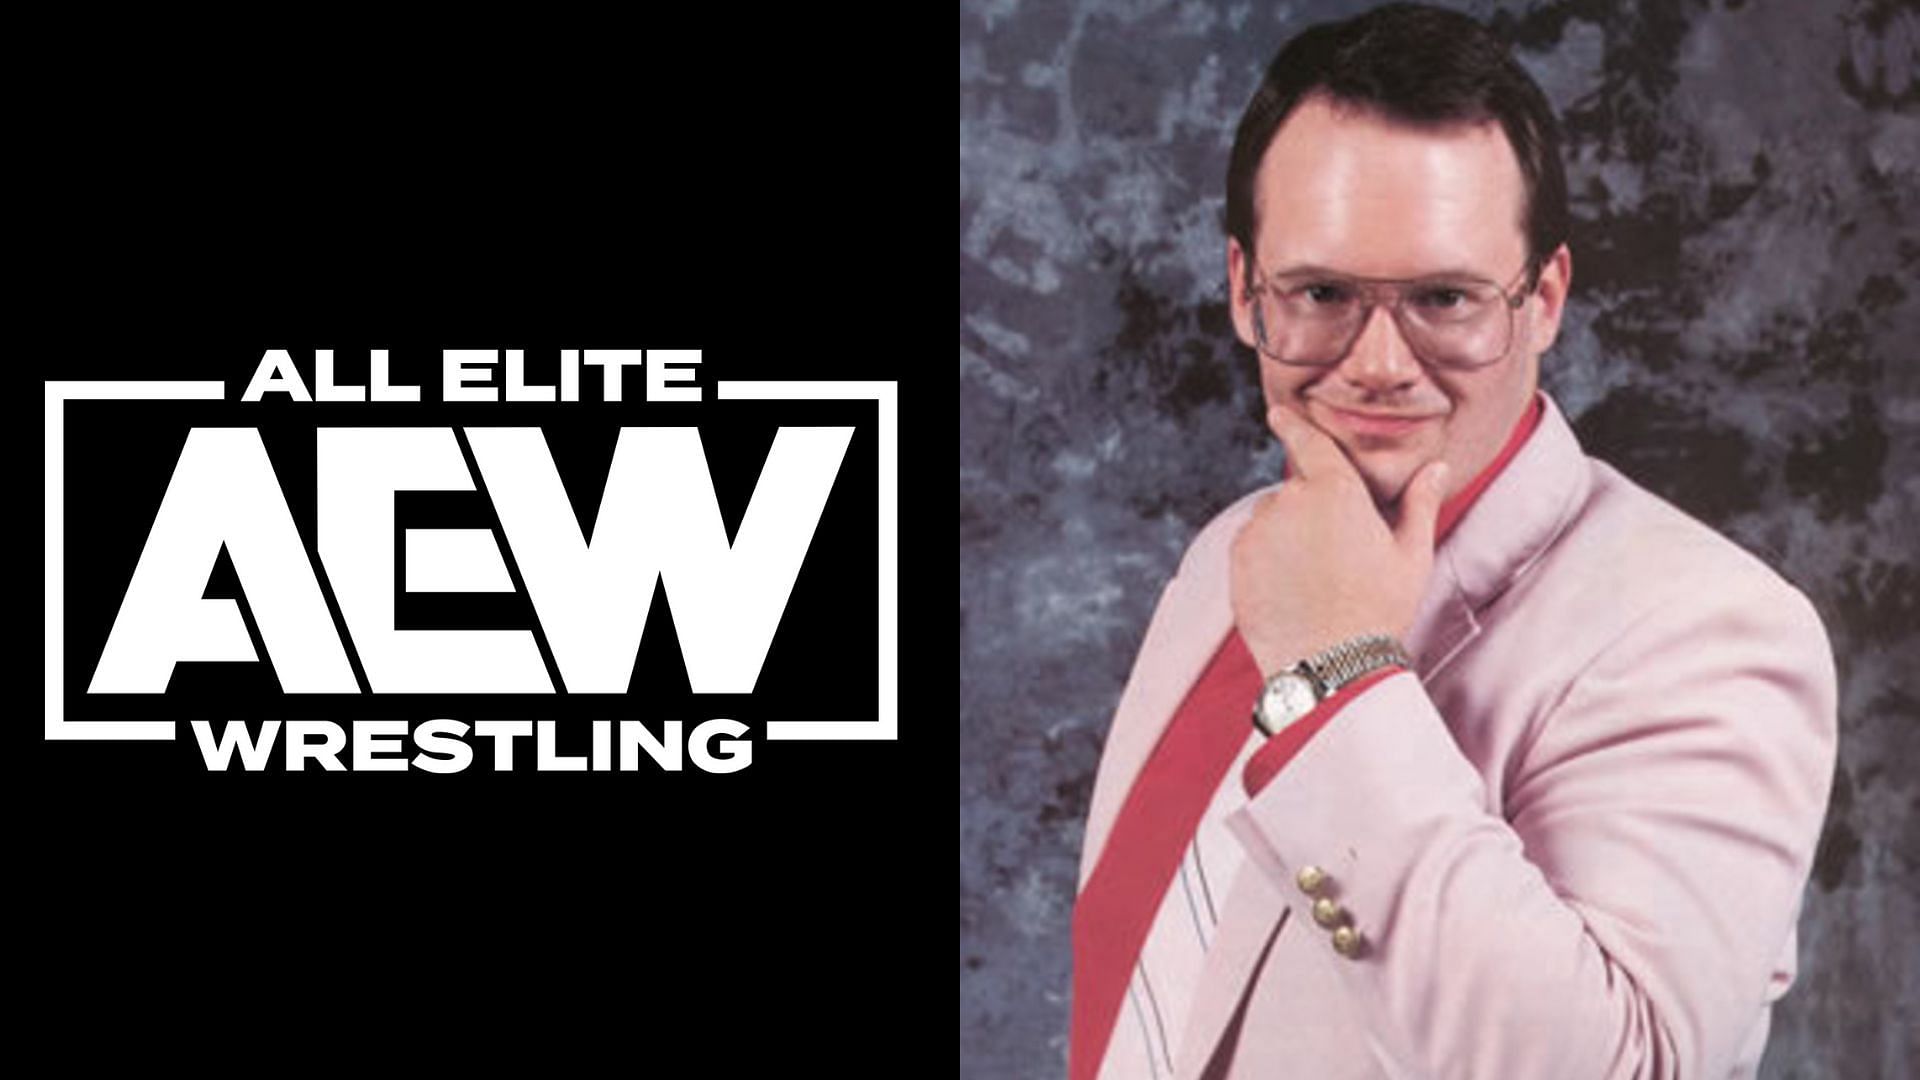 Could this star make a difference upon returning to AEW?